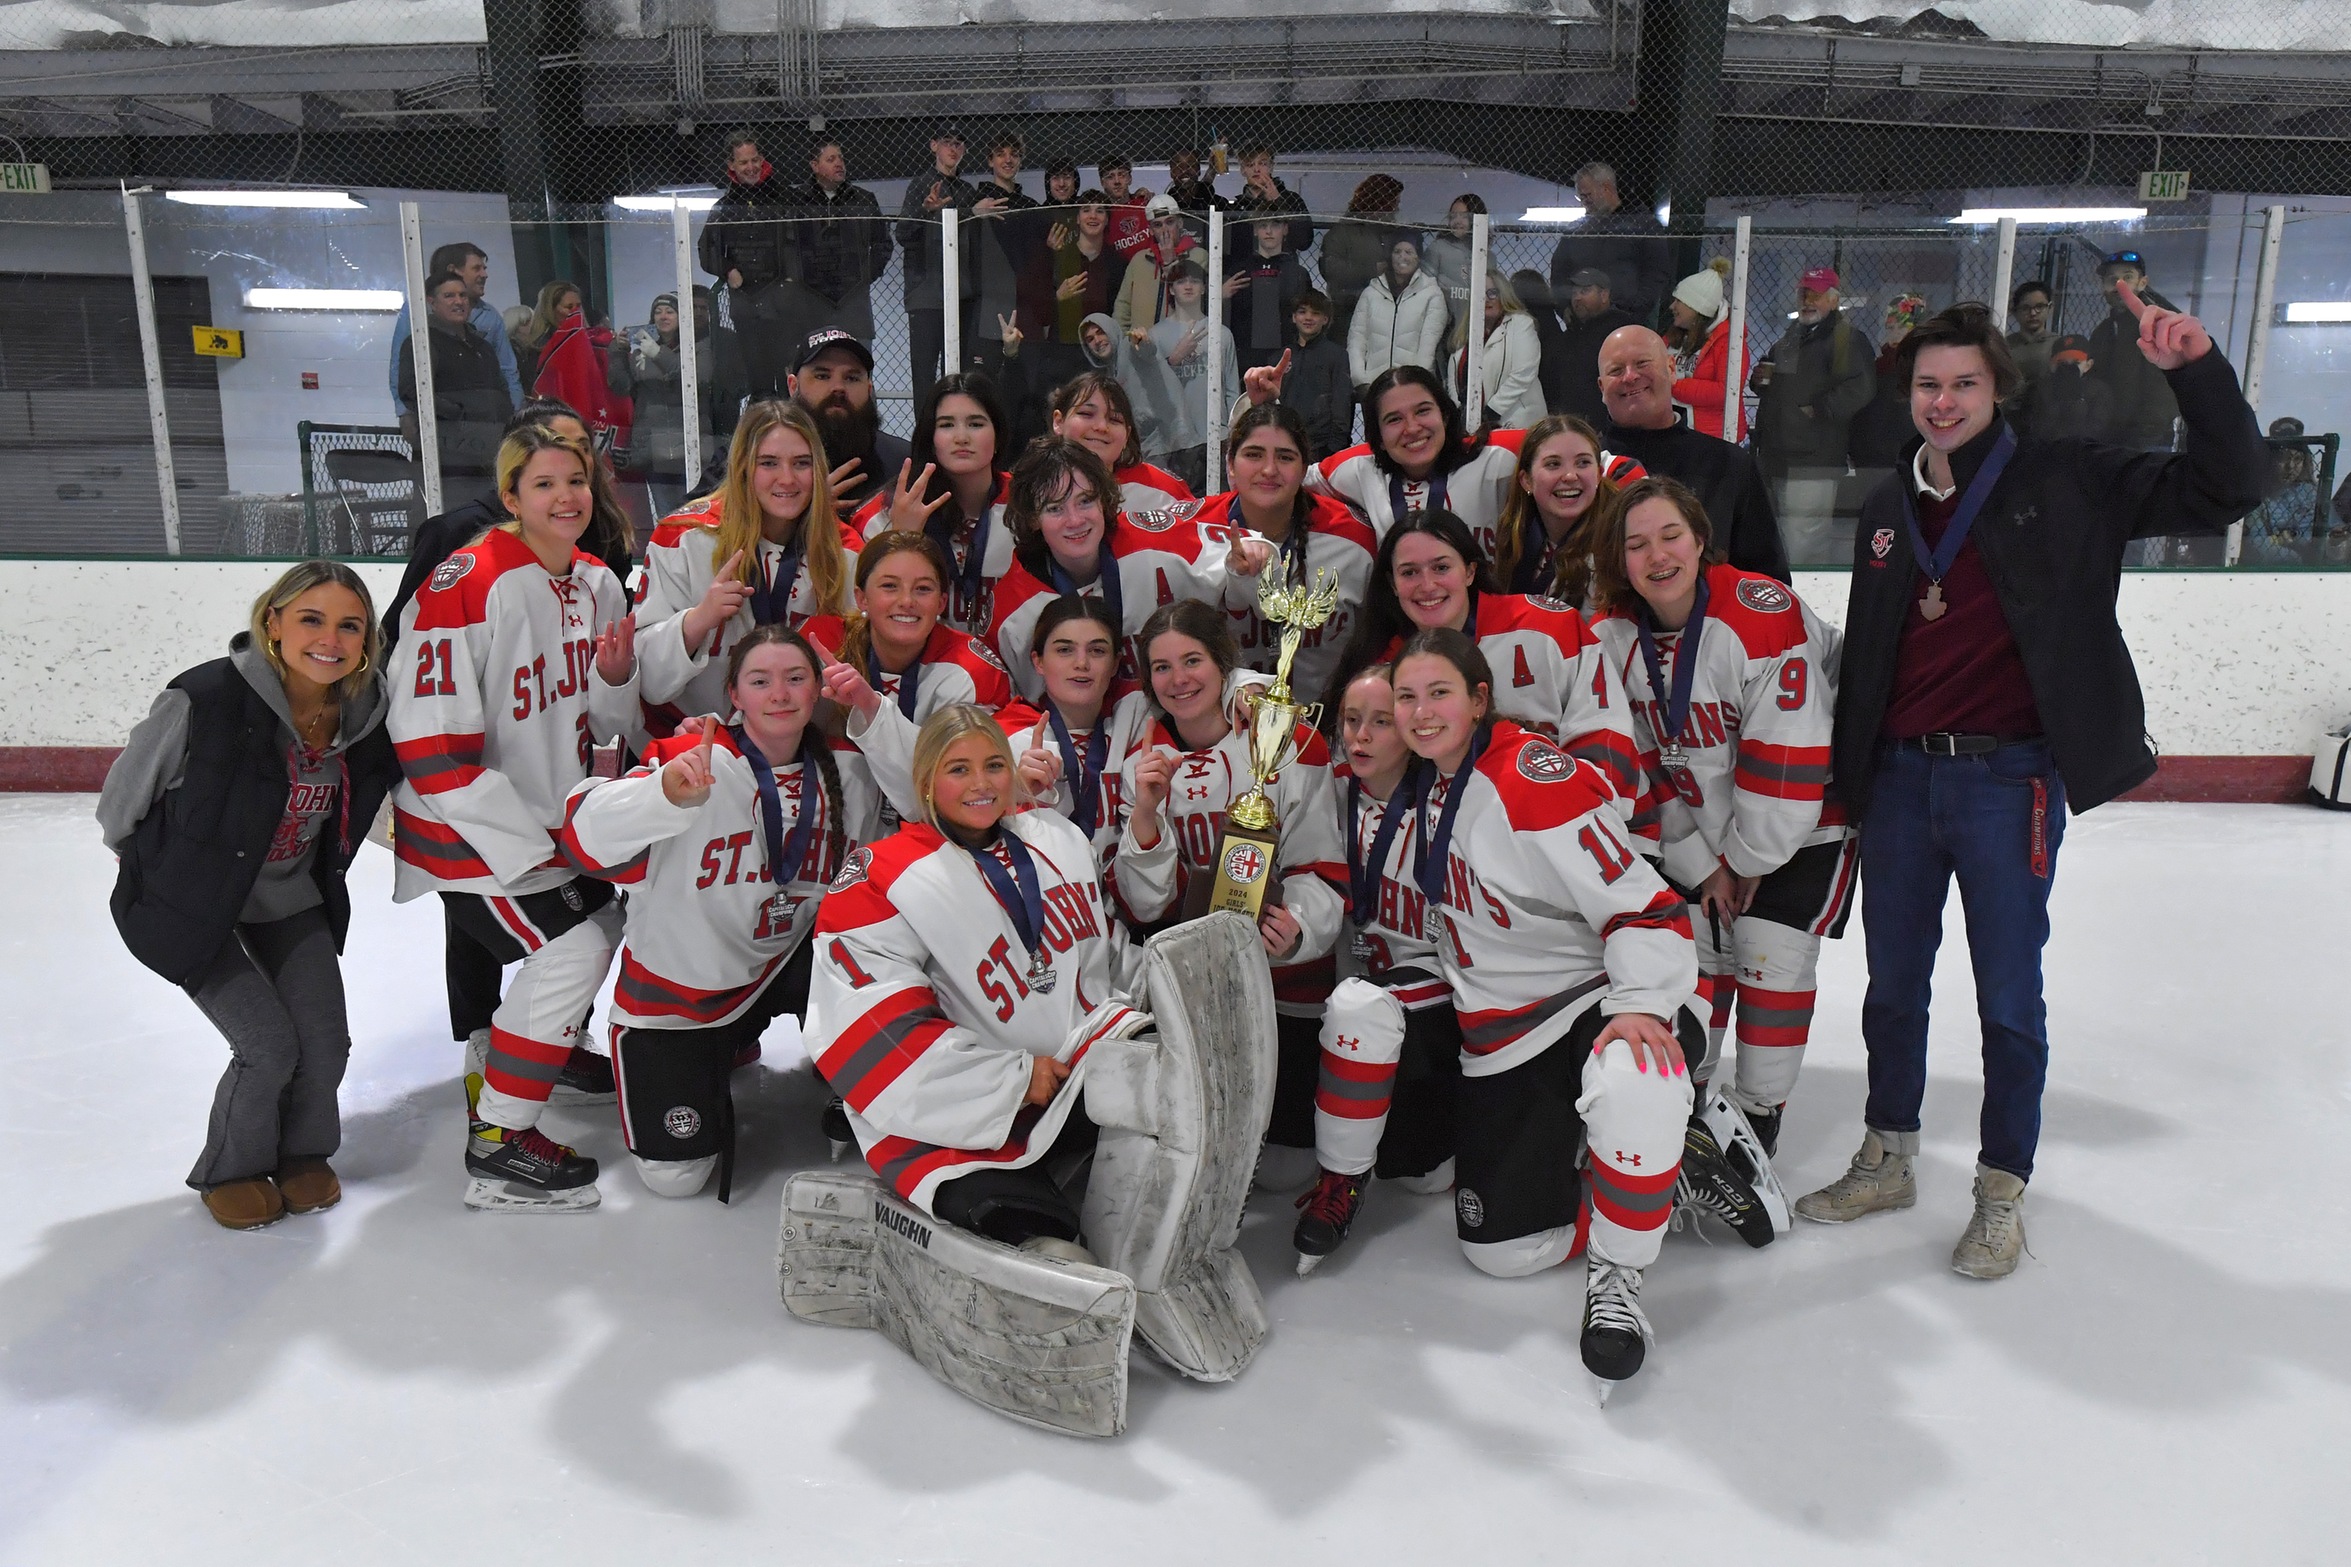 Girls Ice Hockey Champions - St. John's (Photo by Lawrence French)